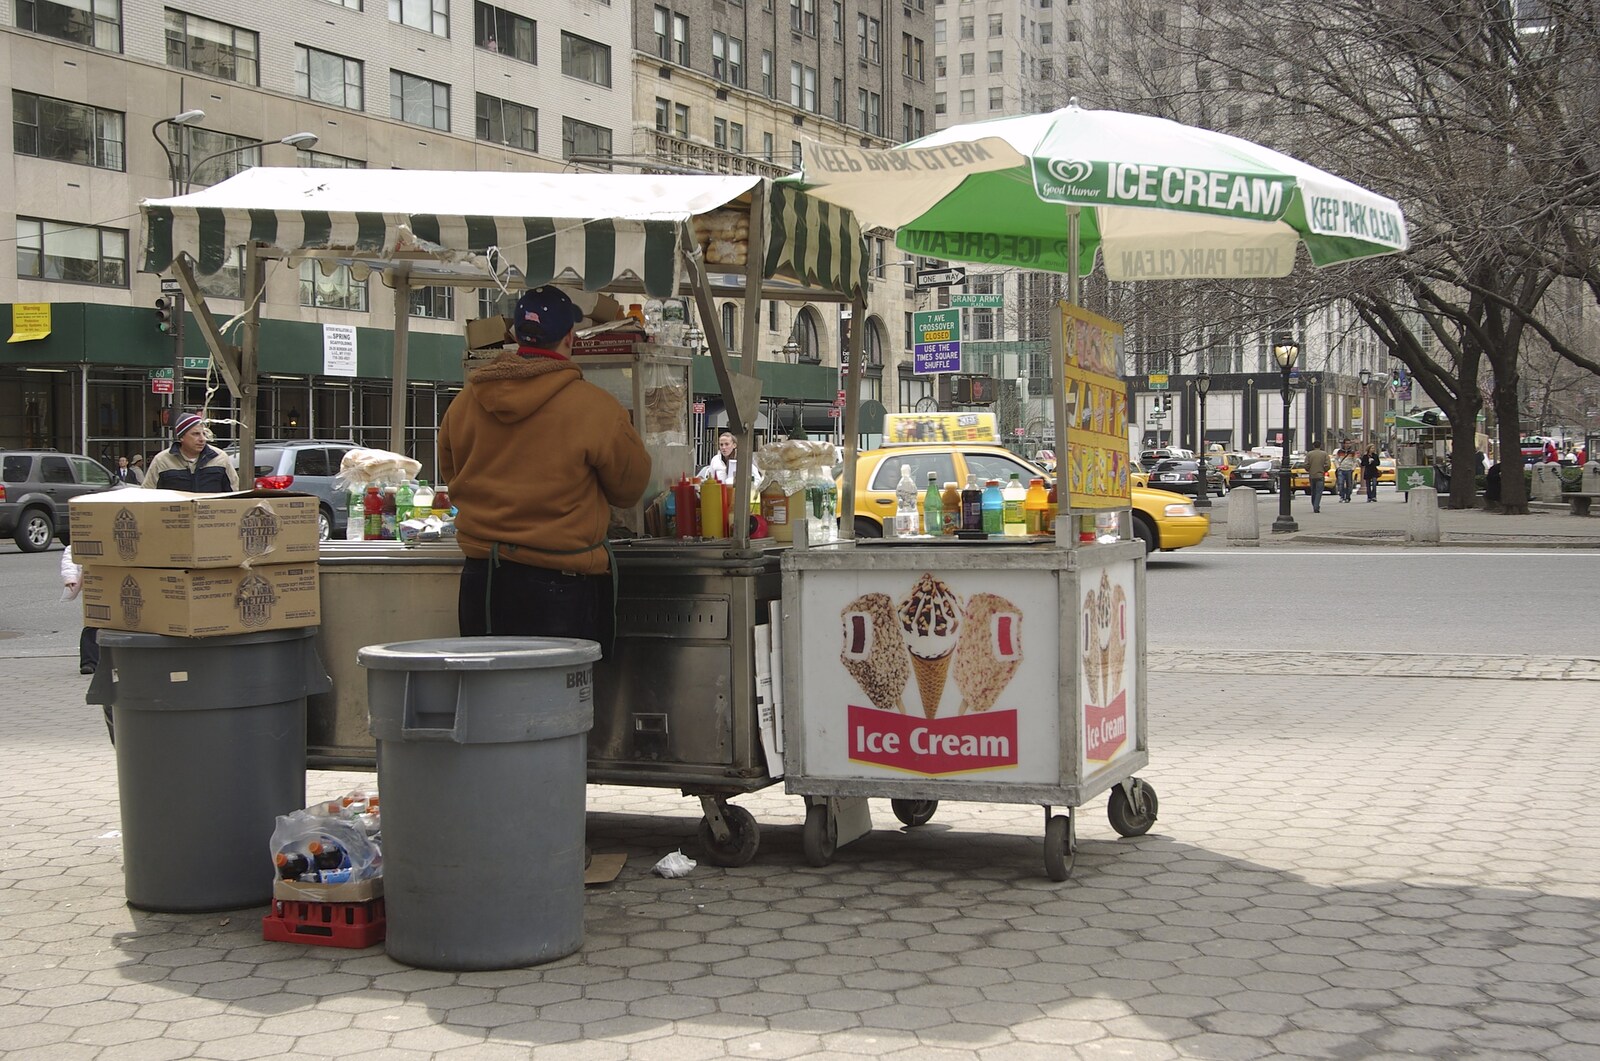 Persian Day Parade, Upper East Side and Midtown, New York, US - 25th March 2007: The hotdog stand